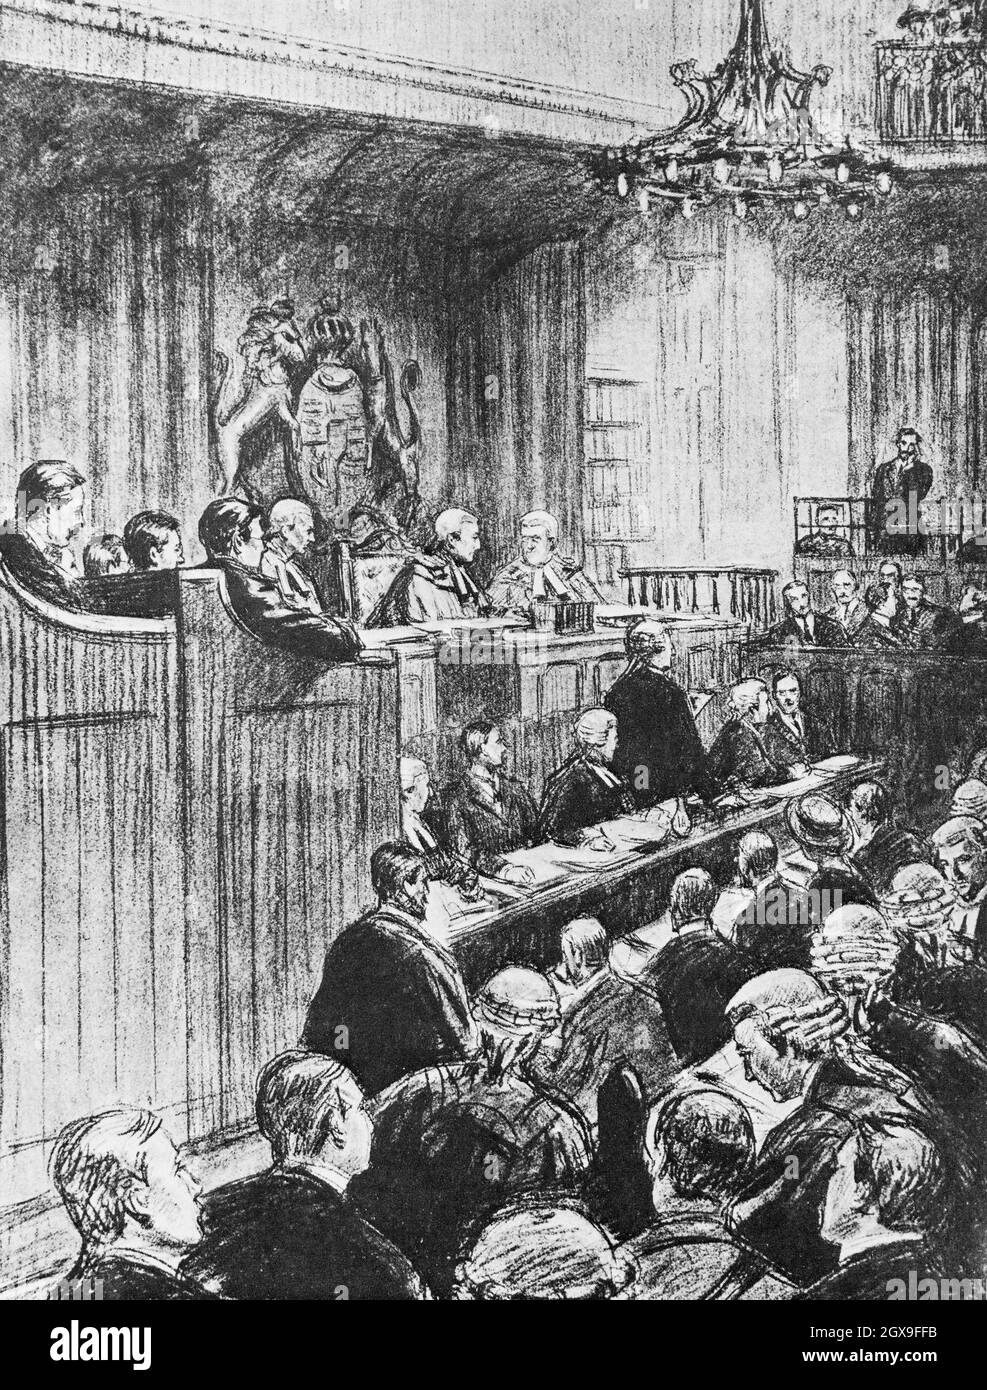 A  sketch of the trial of Roger Casement (1864-1916), a diplomat and Irish nationalist who initially worked for the British Foreign Office as a diplomat, becoming known as a humanitarian activist. After retiring from consular service in 1913, he became involved with Irish republicanism and during World War I, made efforts to gain German military aid for the 1916 Easter Rising that sought to gain Irish independence. He was arrested, convicted and executed for high treason. Support for clemency was undermined by his alleged homosexual activities. Stock Photo